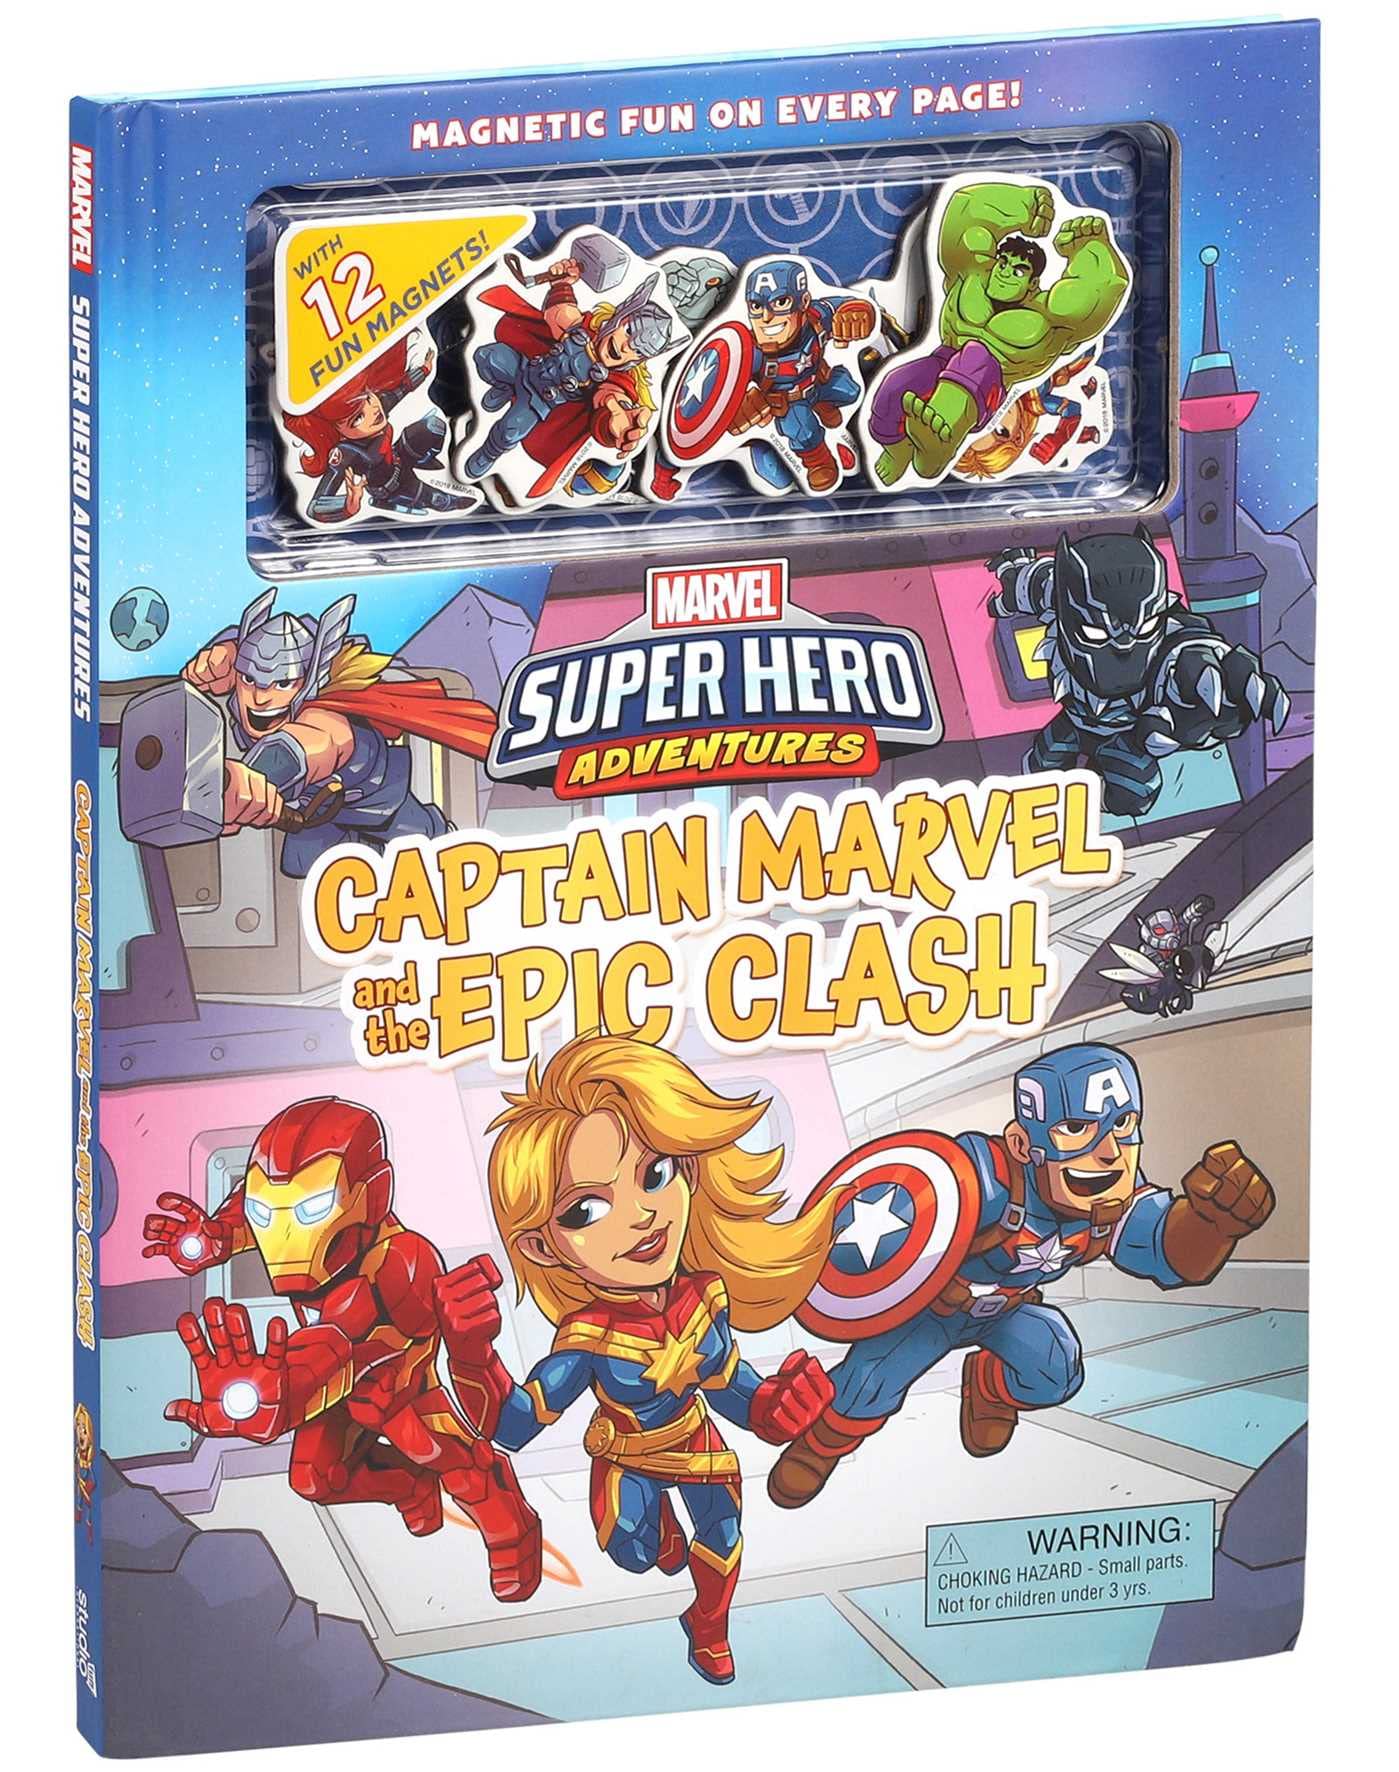 Marvel Super Hero Adventures: Captain Marvel and the Epic Clash (Magnetic Hardcover)